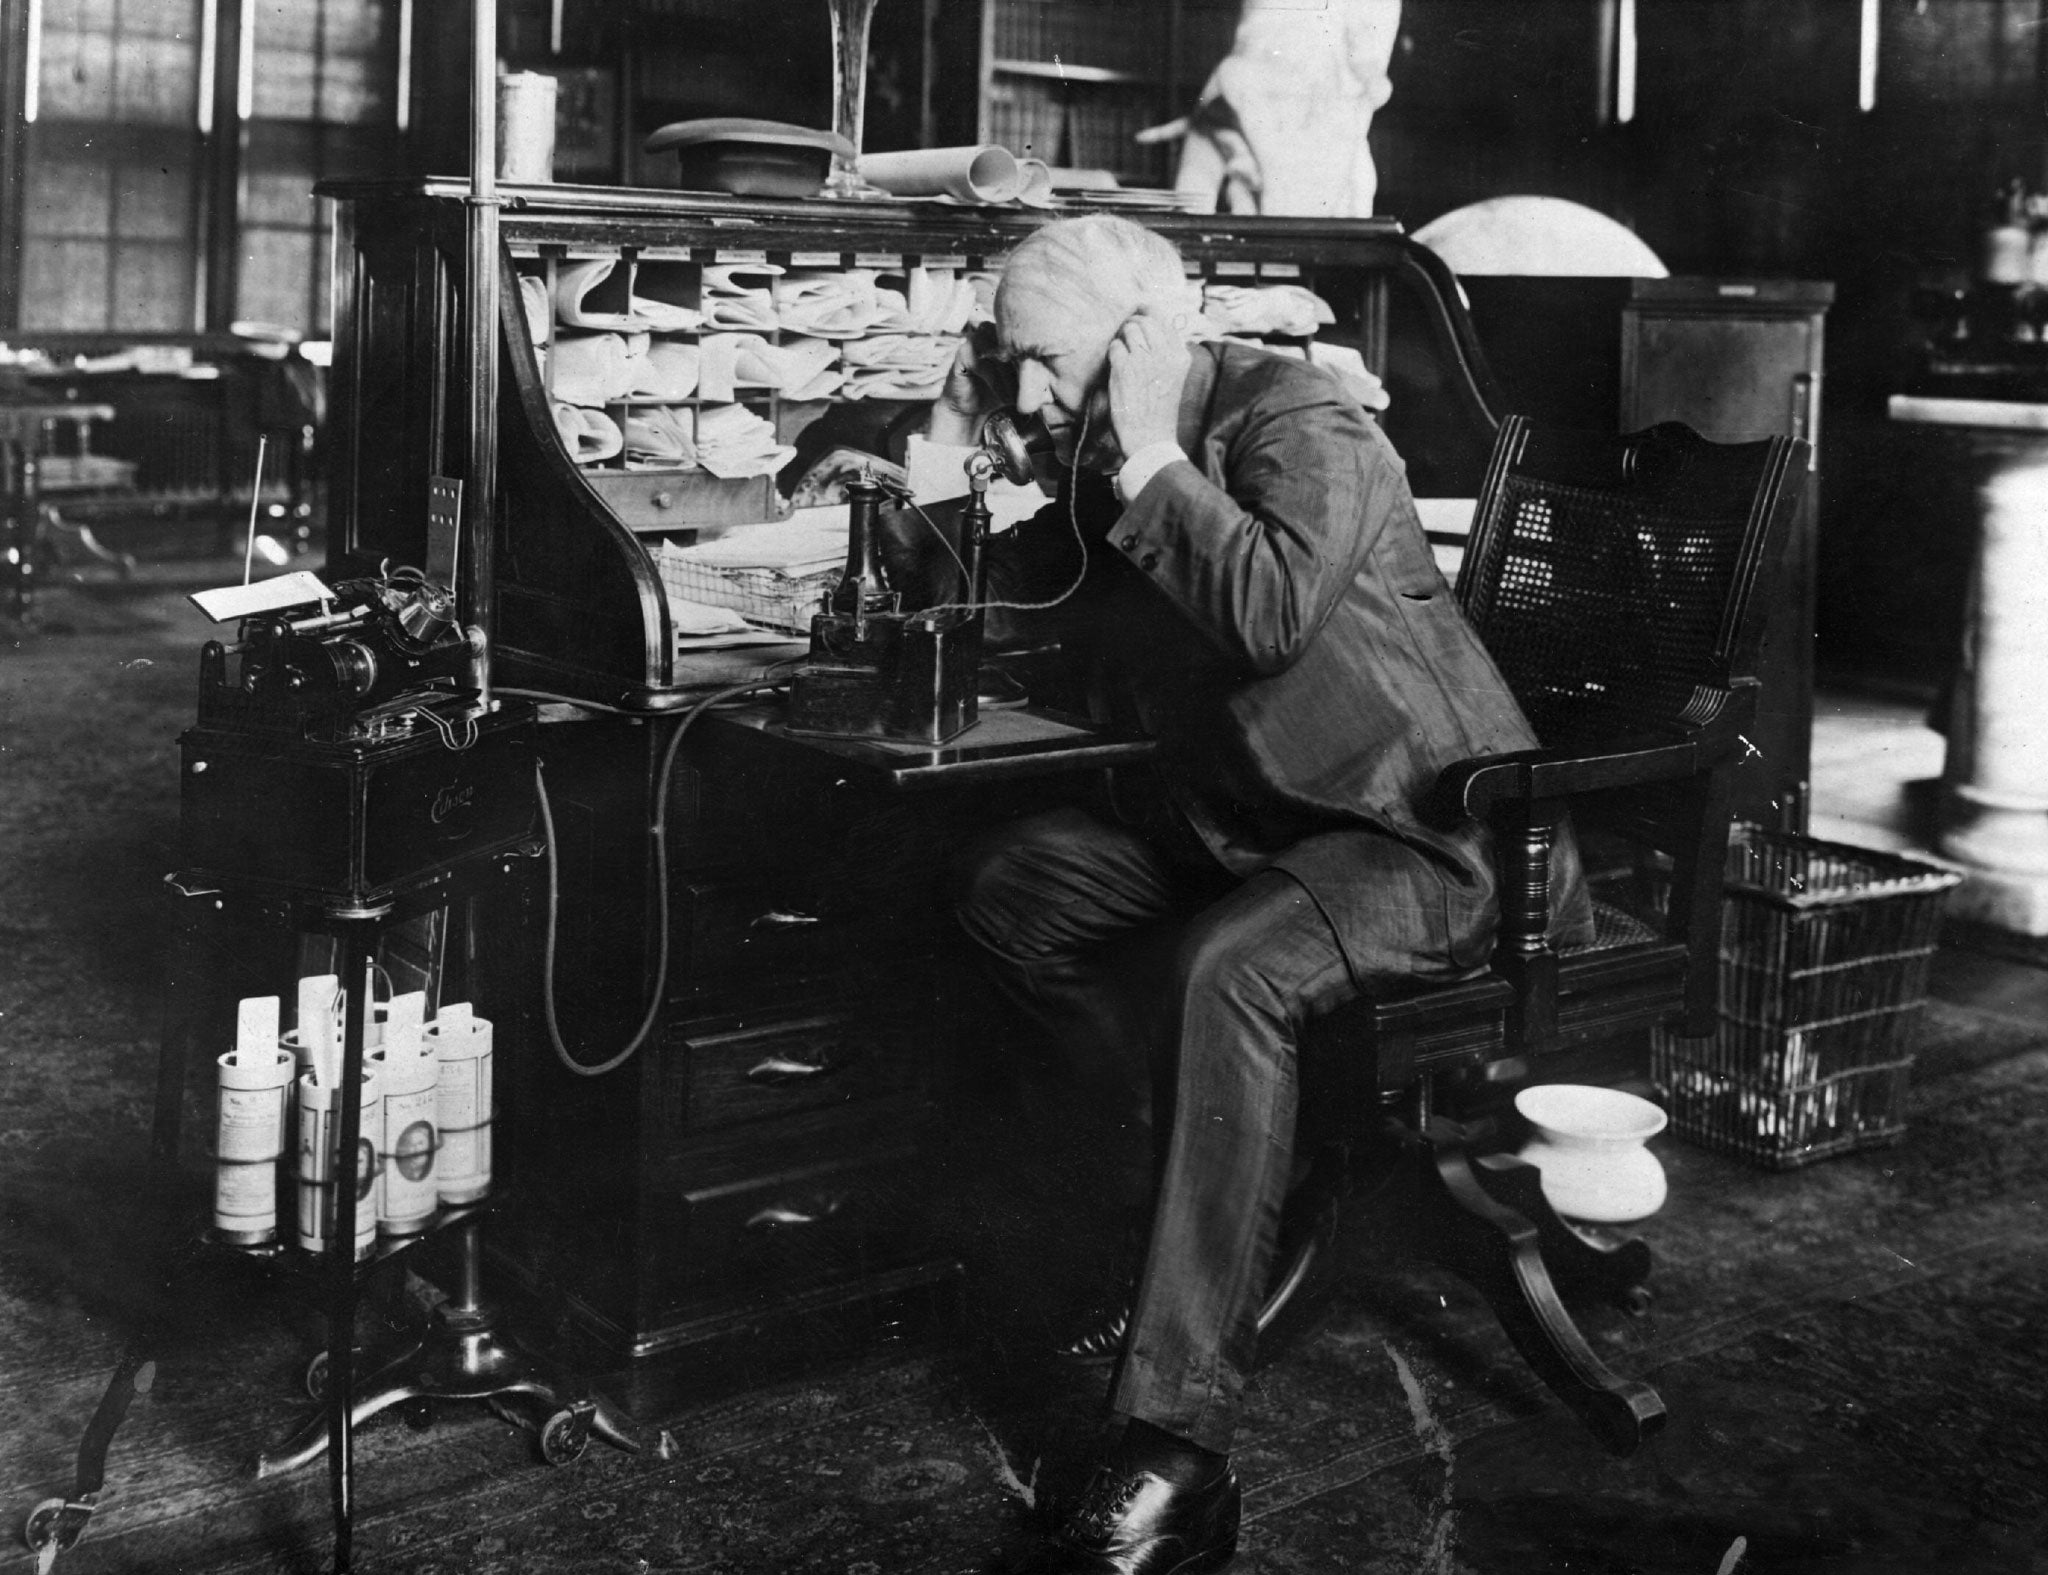 Thomas Edison dictating instructions to an employee on his Telescribe machine